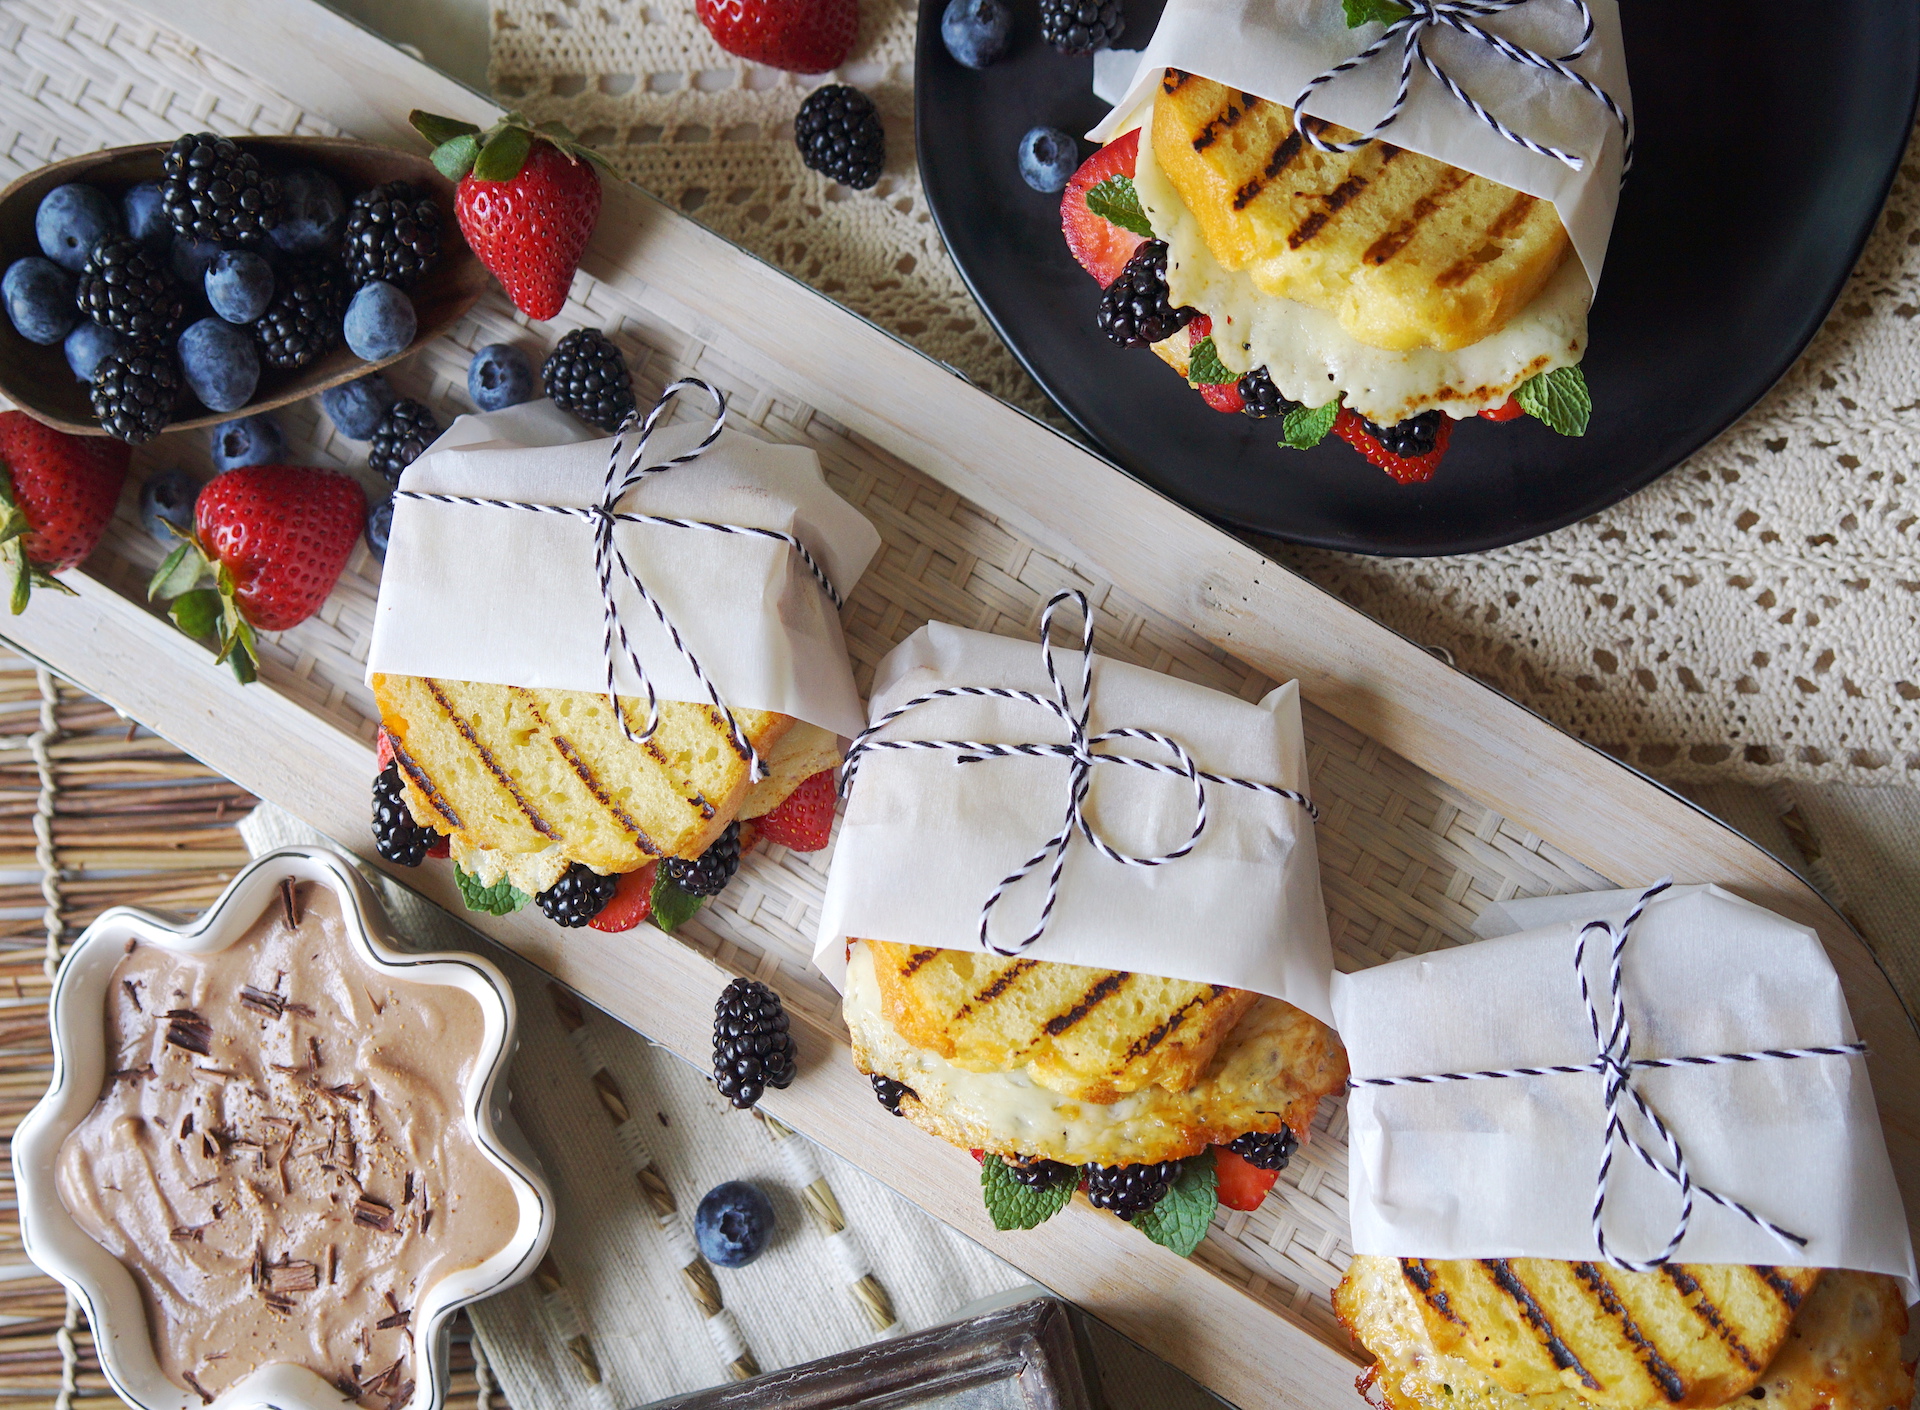 Grilled Fruit Caprese “Cake-wich”